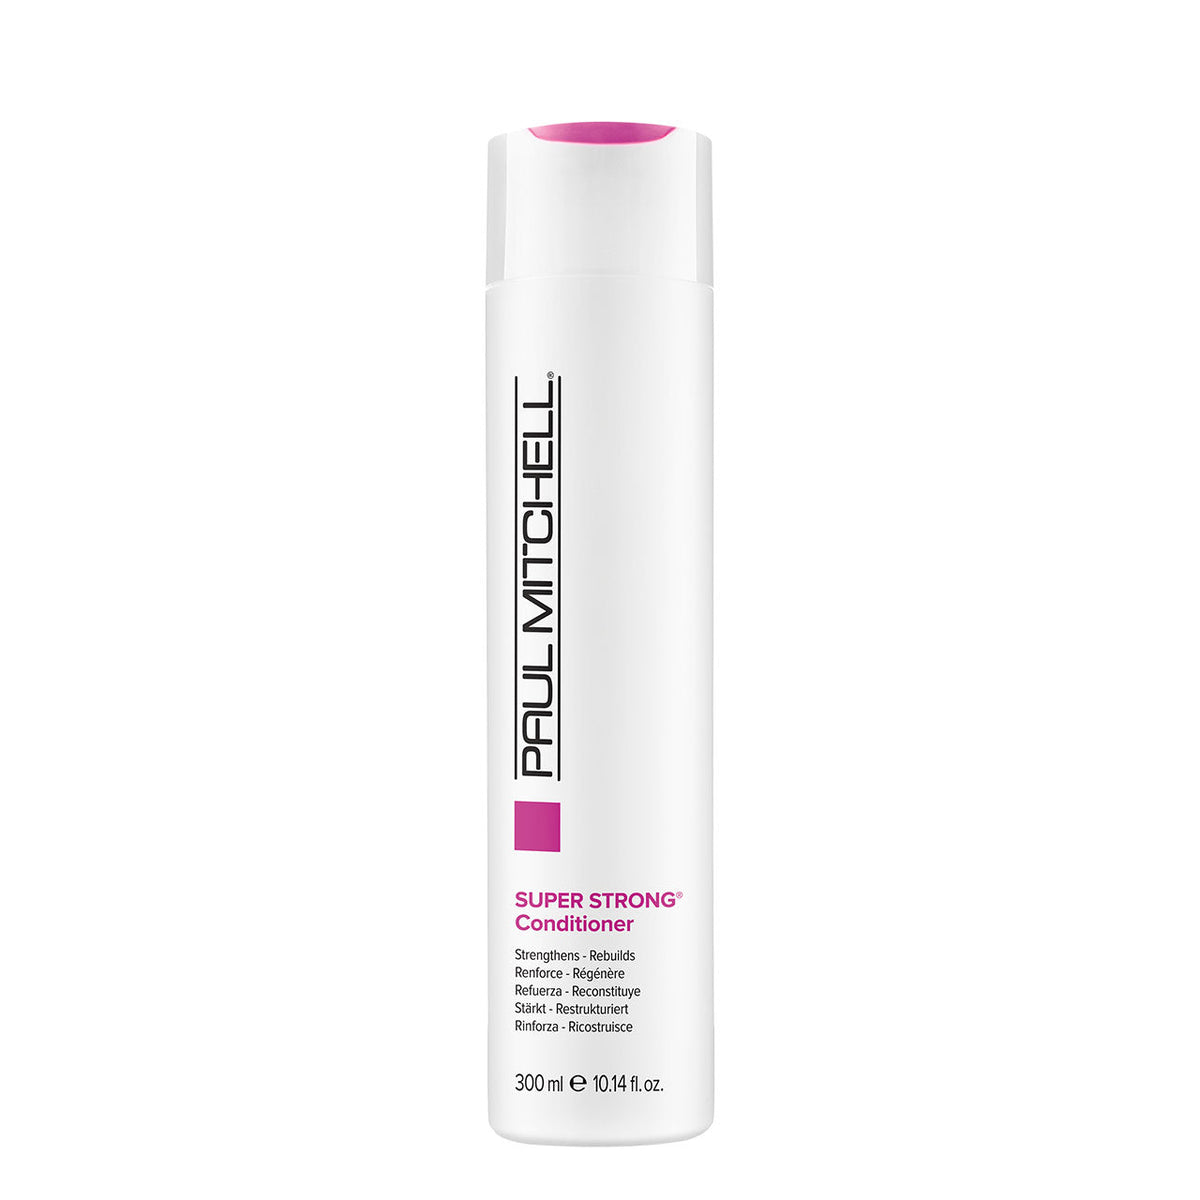 Super Strong Conditioner - 300ML - by Paul Mitchell |ProCare Outlet|